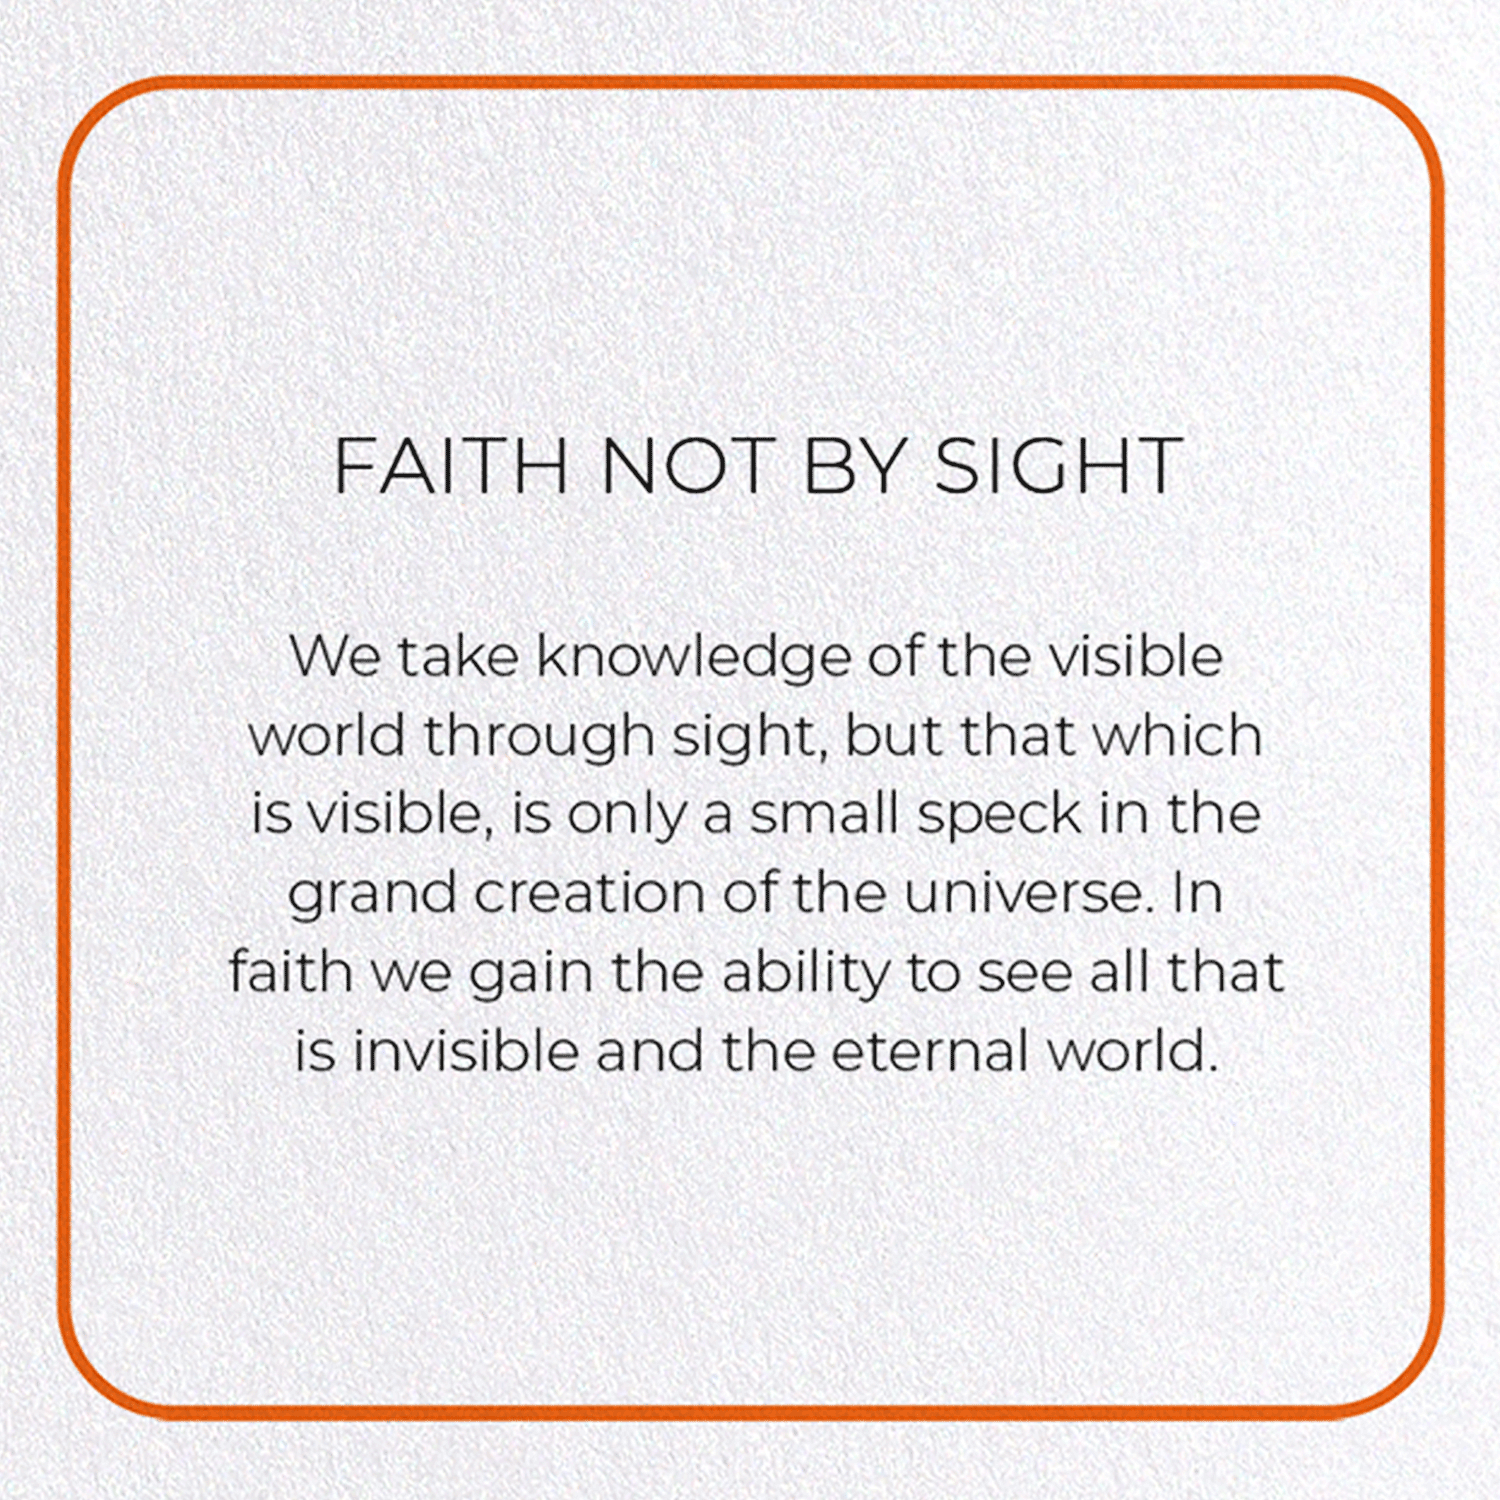 FAITH NOT BY SIGHT: Photo Greeting Card